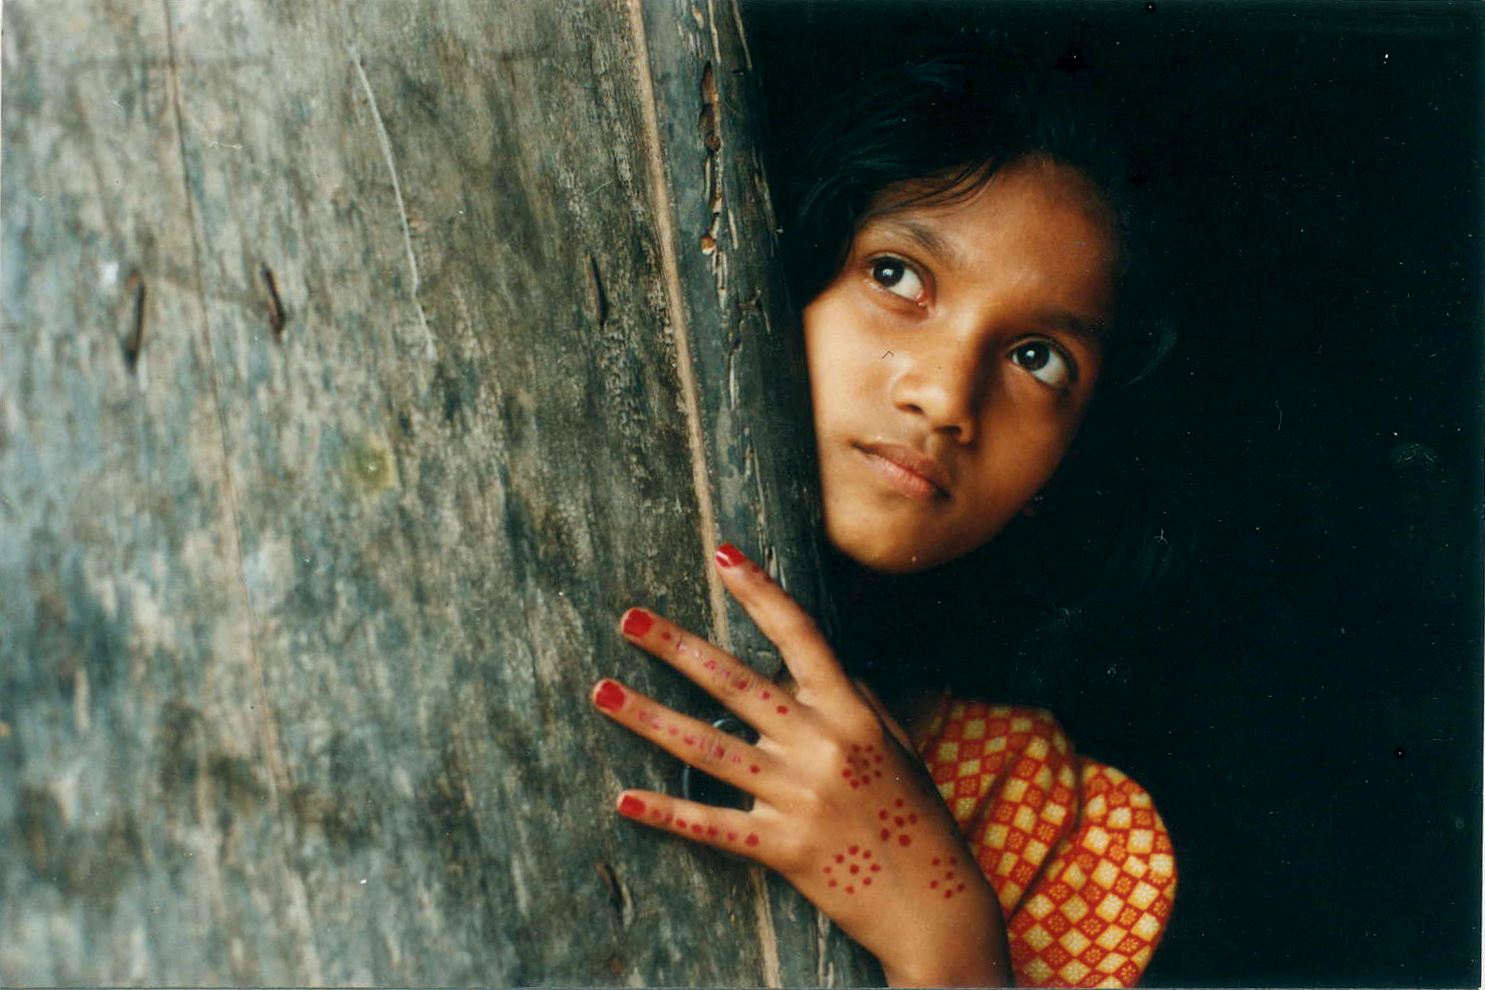 Sad state of a girl child in India